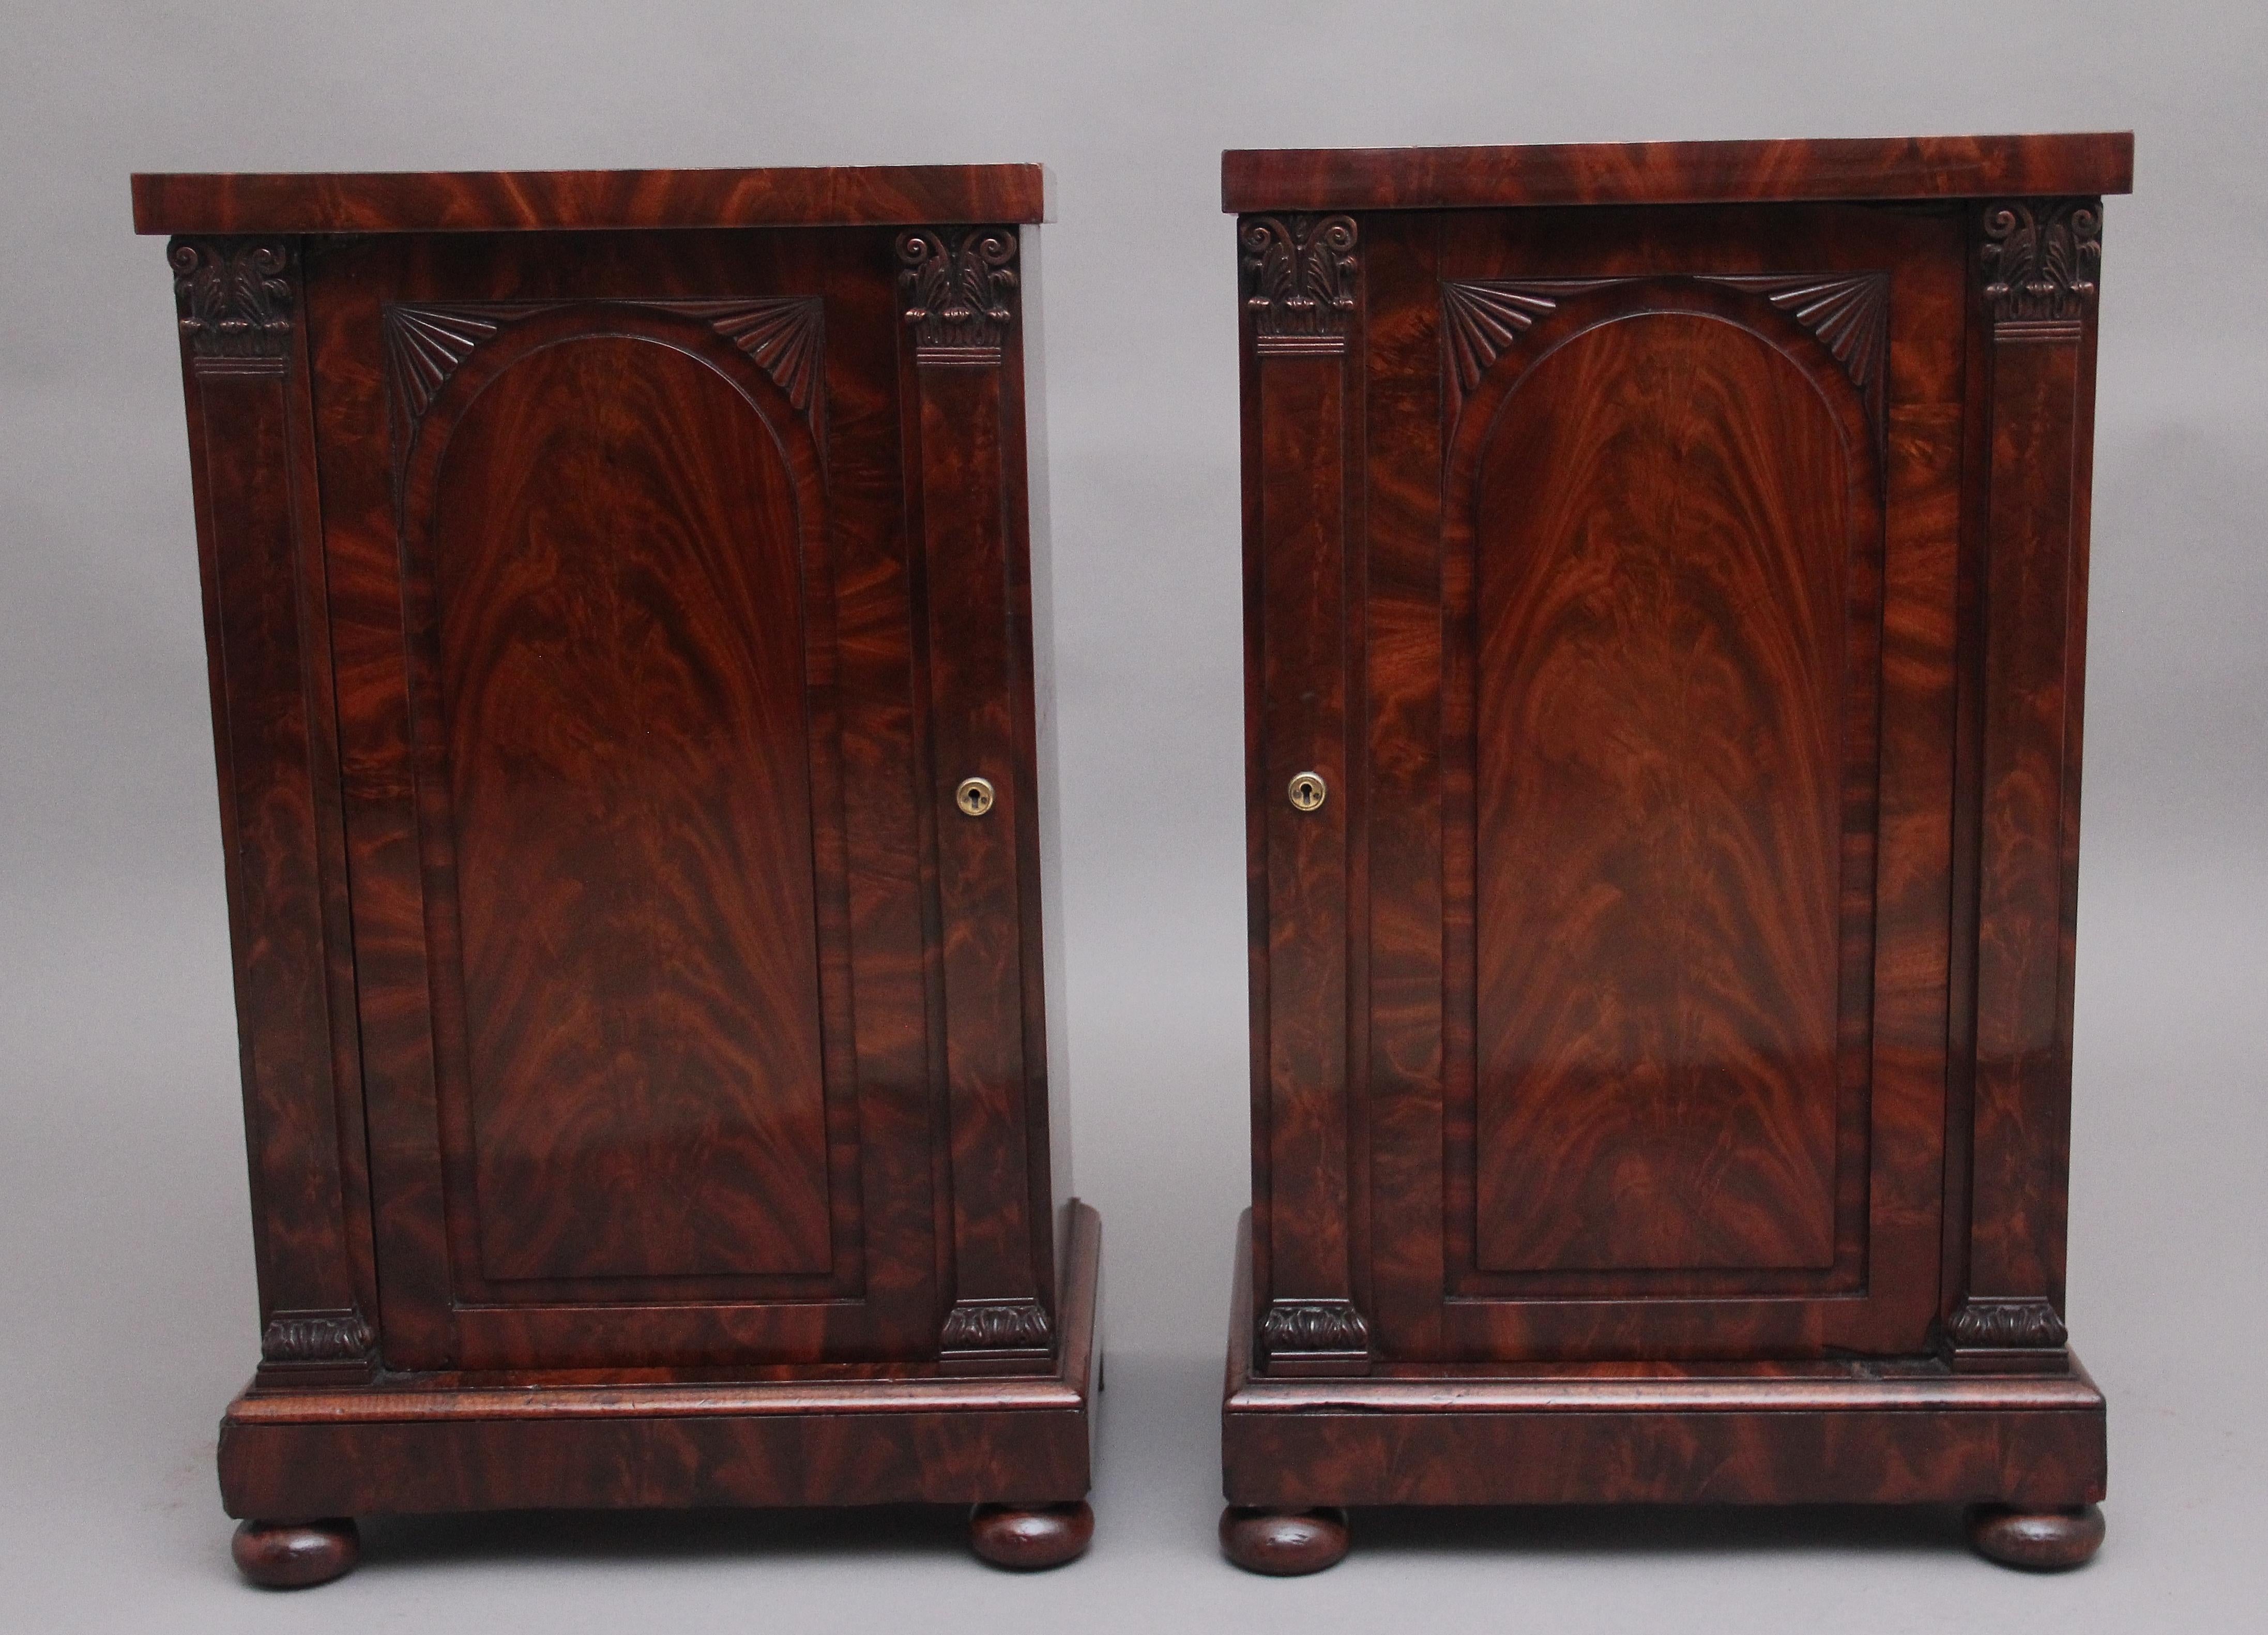 A pair of 19th Century flame mahogany bedside cabinets, nice figured top above a cupboard door opening to reveal a single fixed shelf inside, the door fronts having a central oval panel with carved decoration at the top, columns at either side with